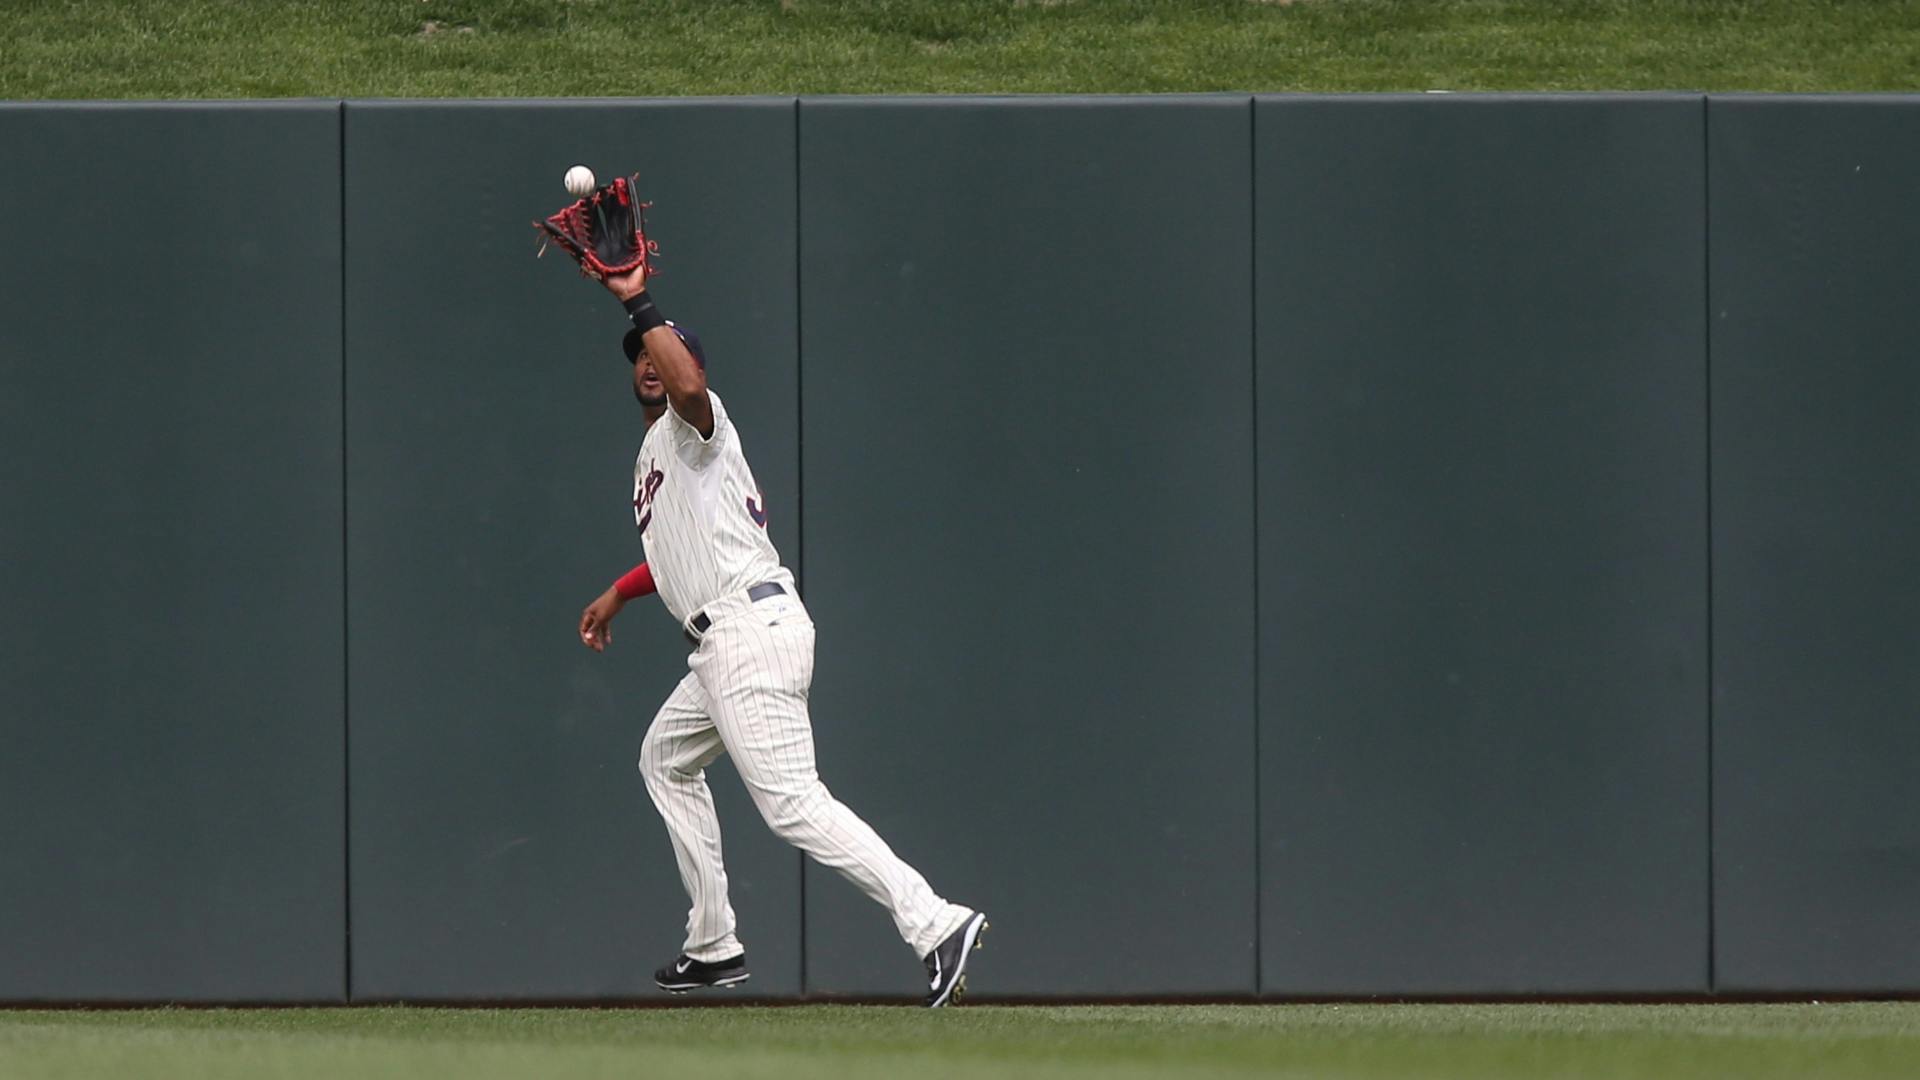 Twins center fielder Aaron Hicks says his critical error Friday was "a ball I catch all the time."